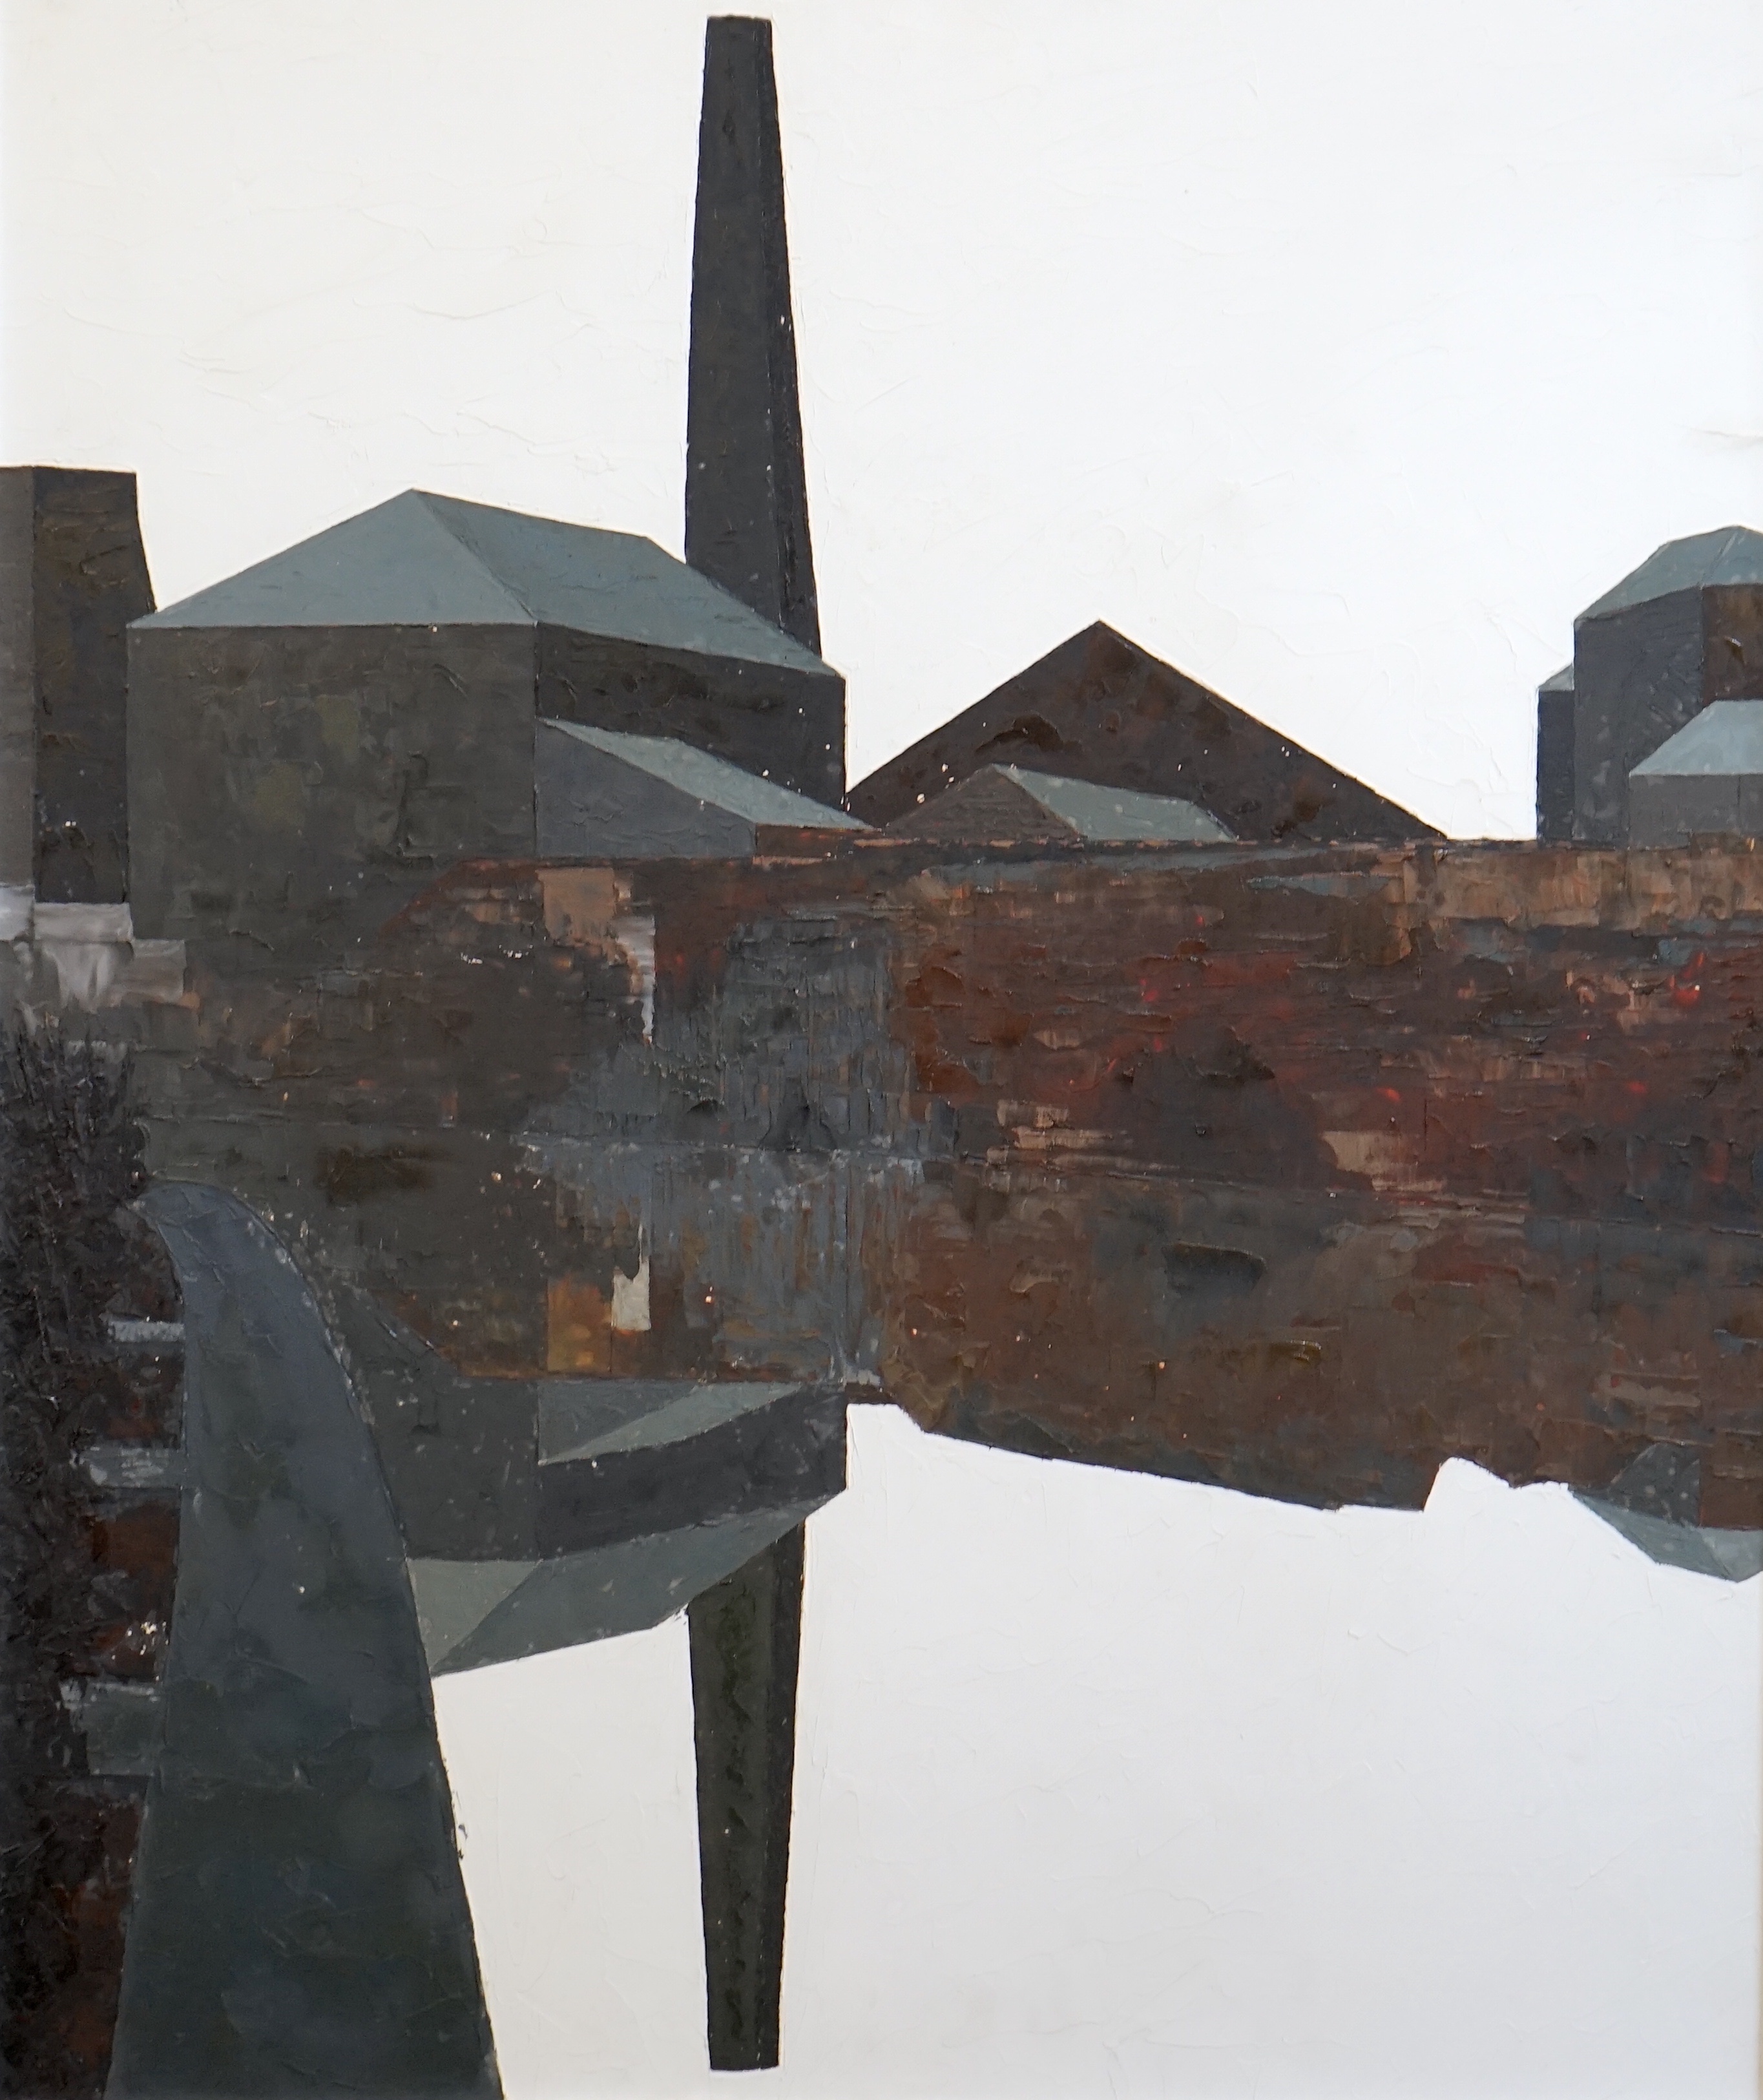 Maurice A. Wade (1917-1991), ‘Black Chimney & Red Wall’, oil on board, 76 x 63cm